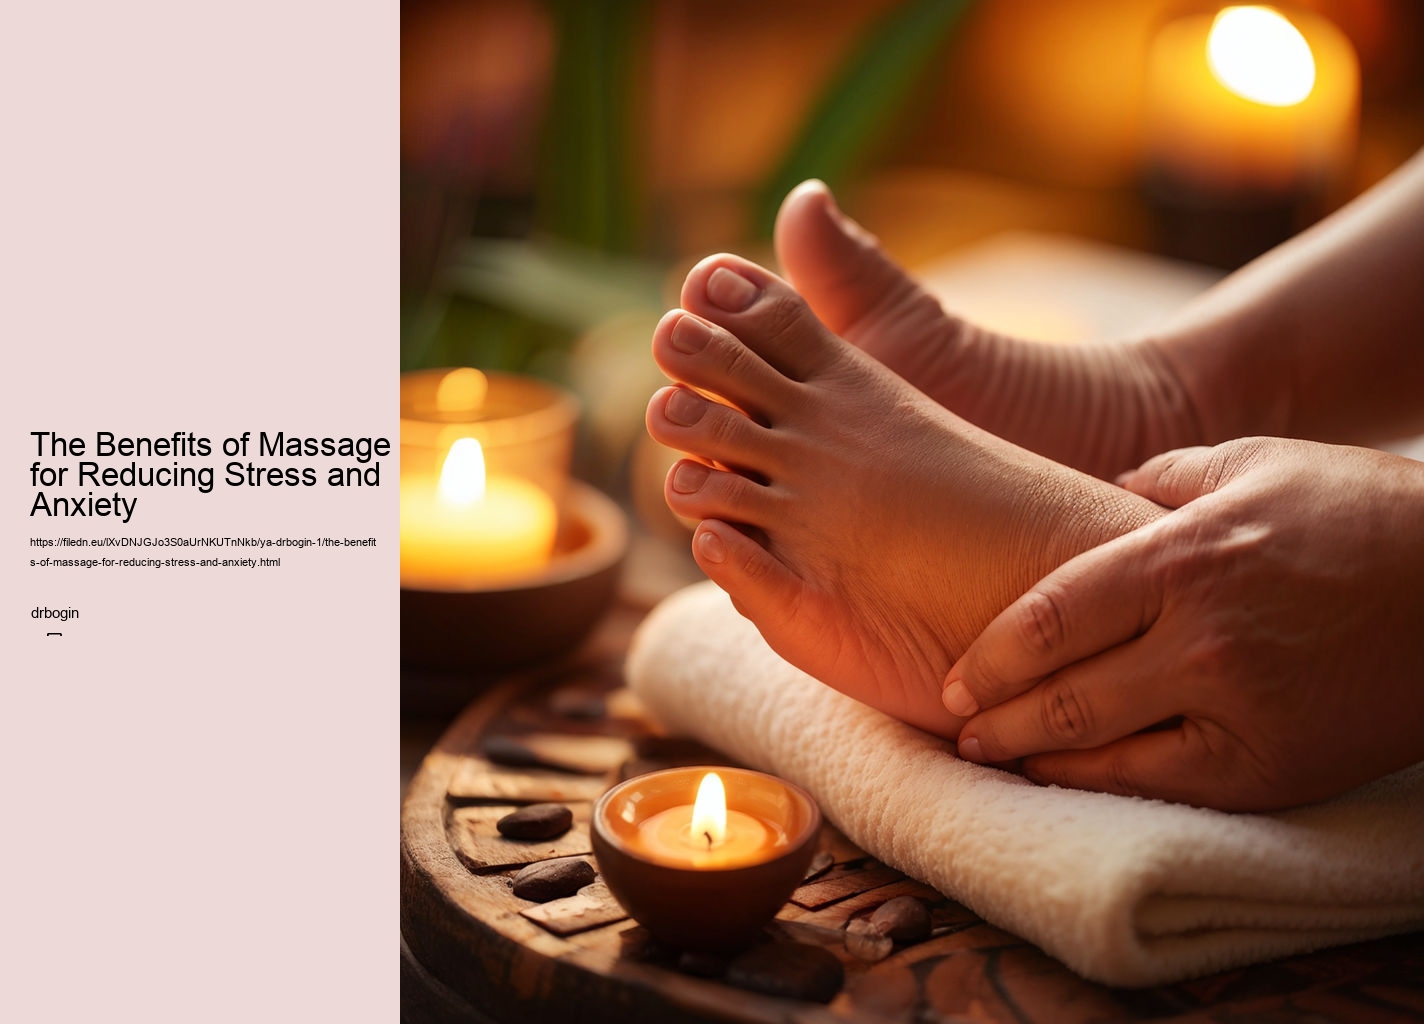 The Benefits of Massage for Reducing Stress and Anxiety